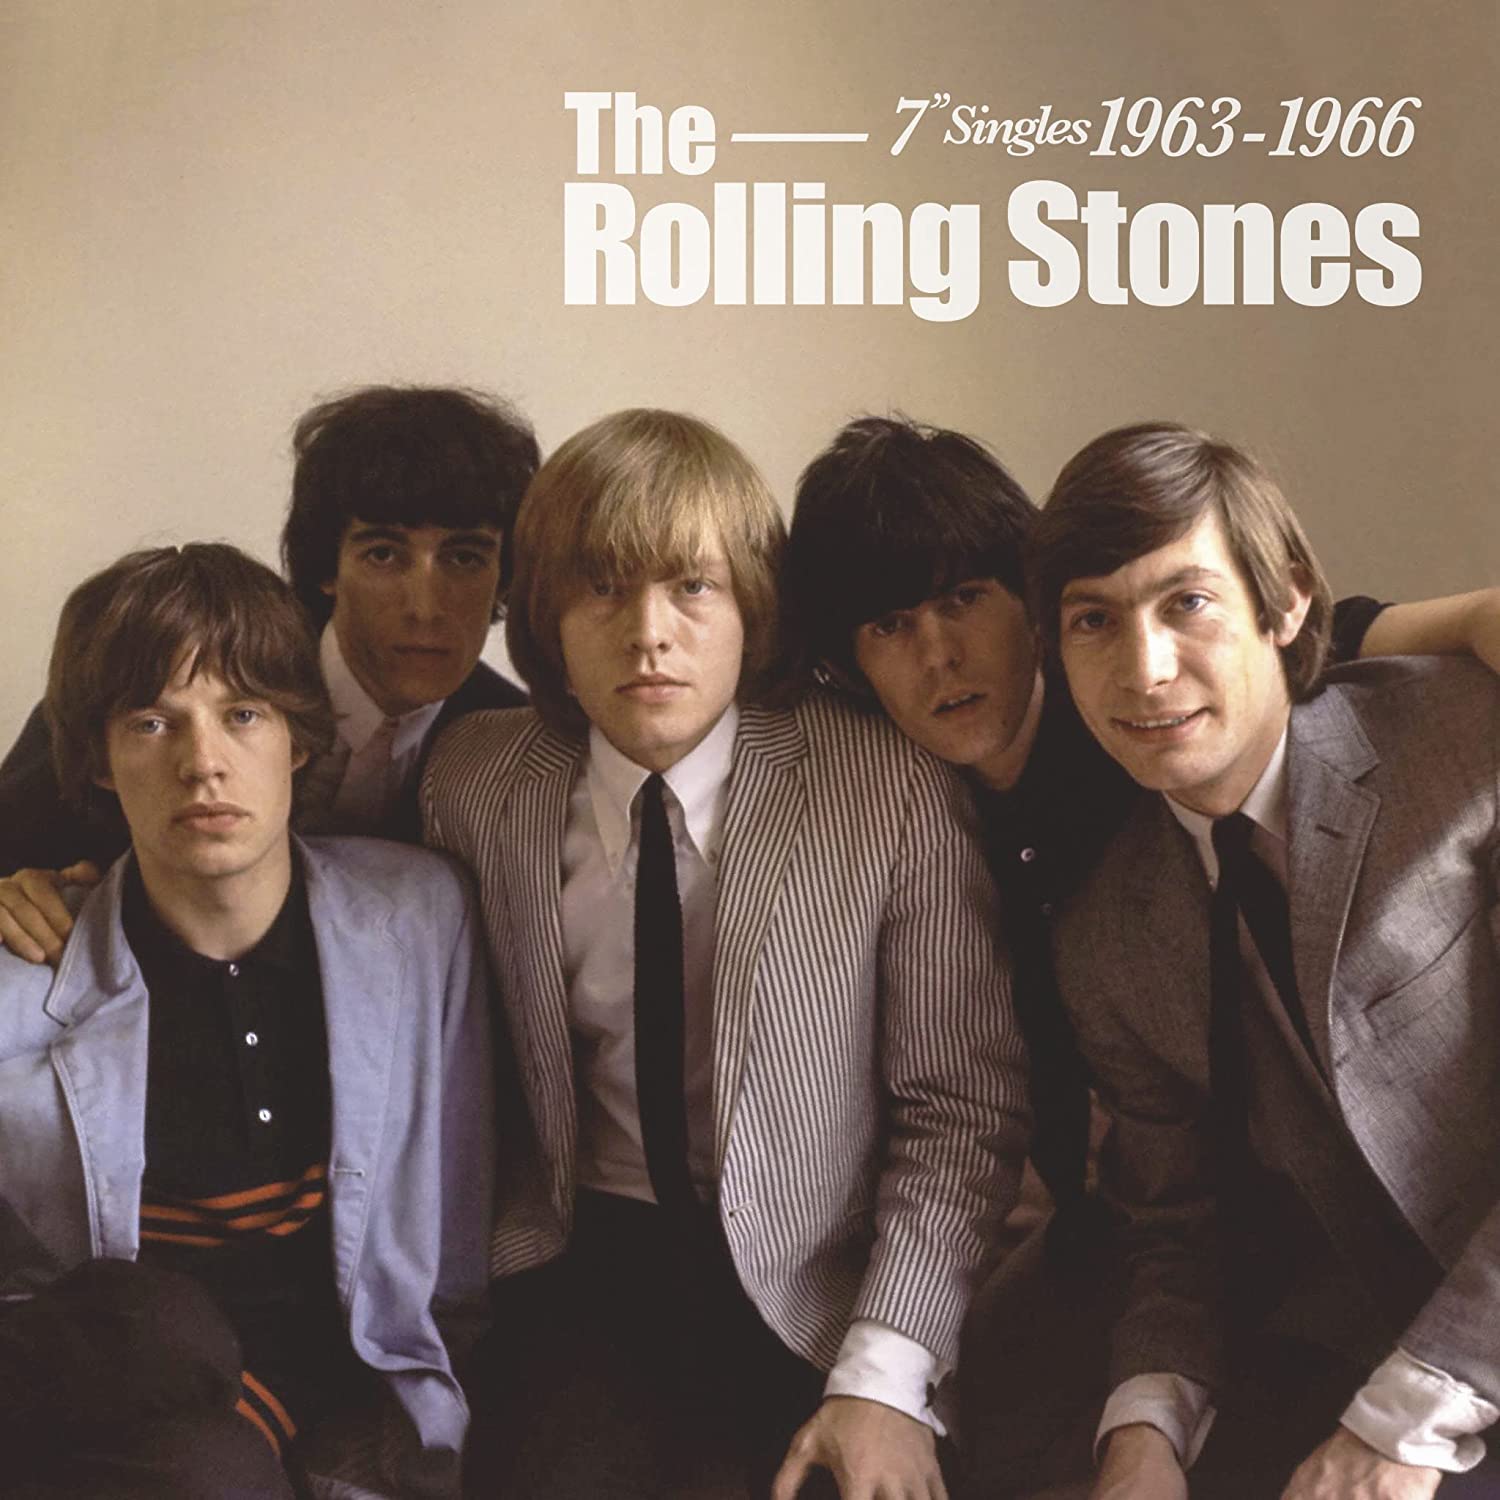 The Rolling Stones - 7 Singles 1963-1966 - Vinyl | The Rolling Stones image0